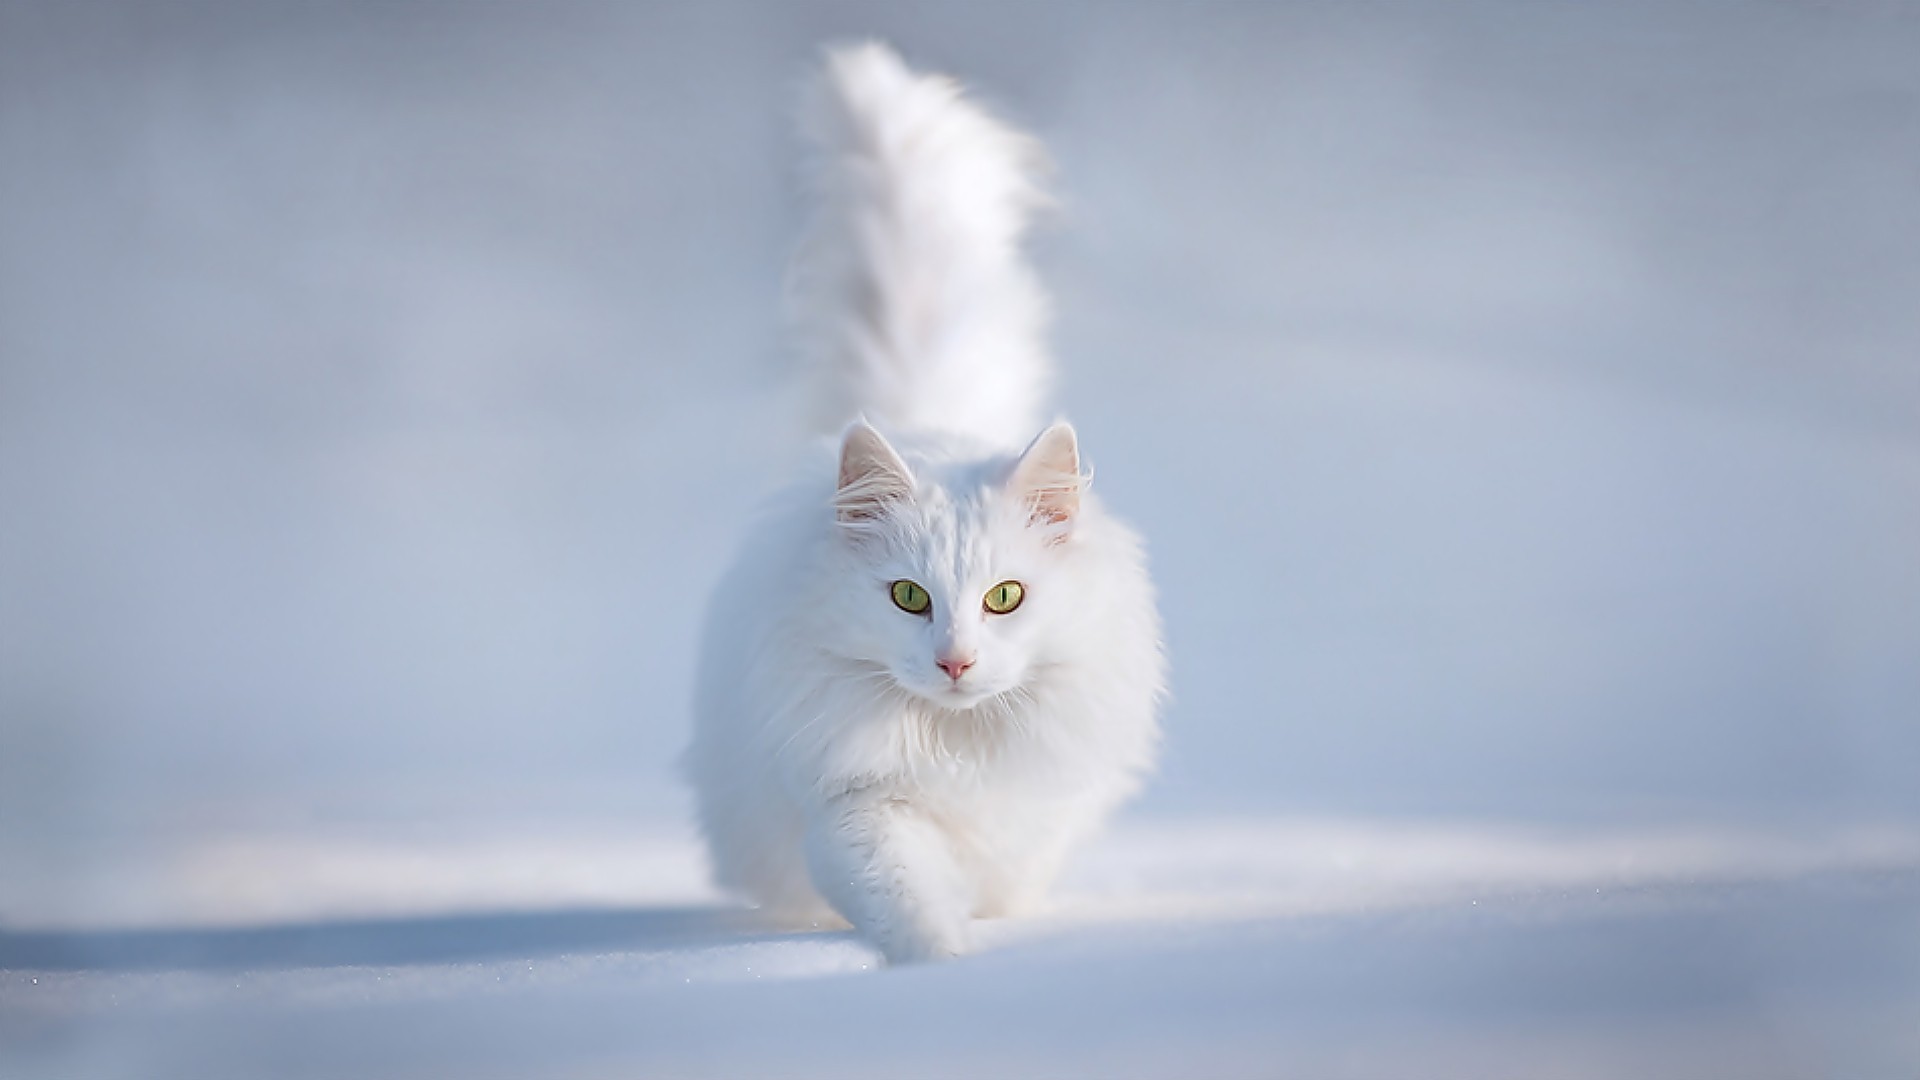 Snow White Cat Wallpaper High Definition Quality Widescreen